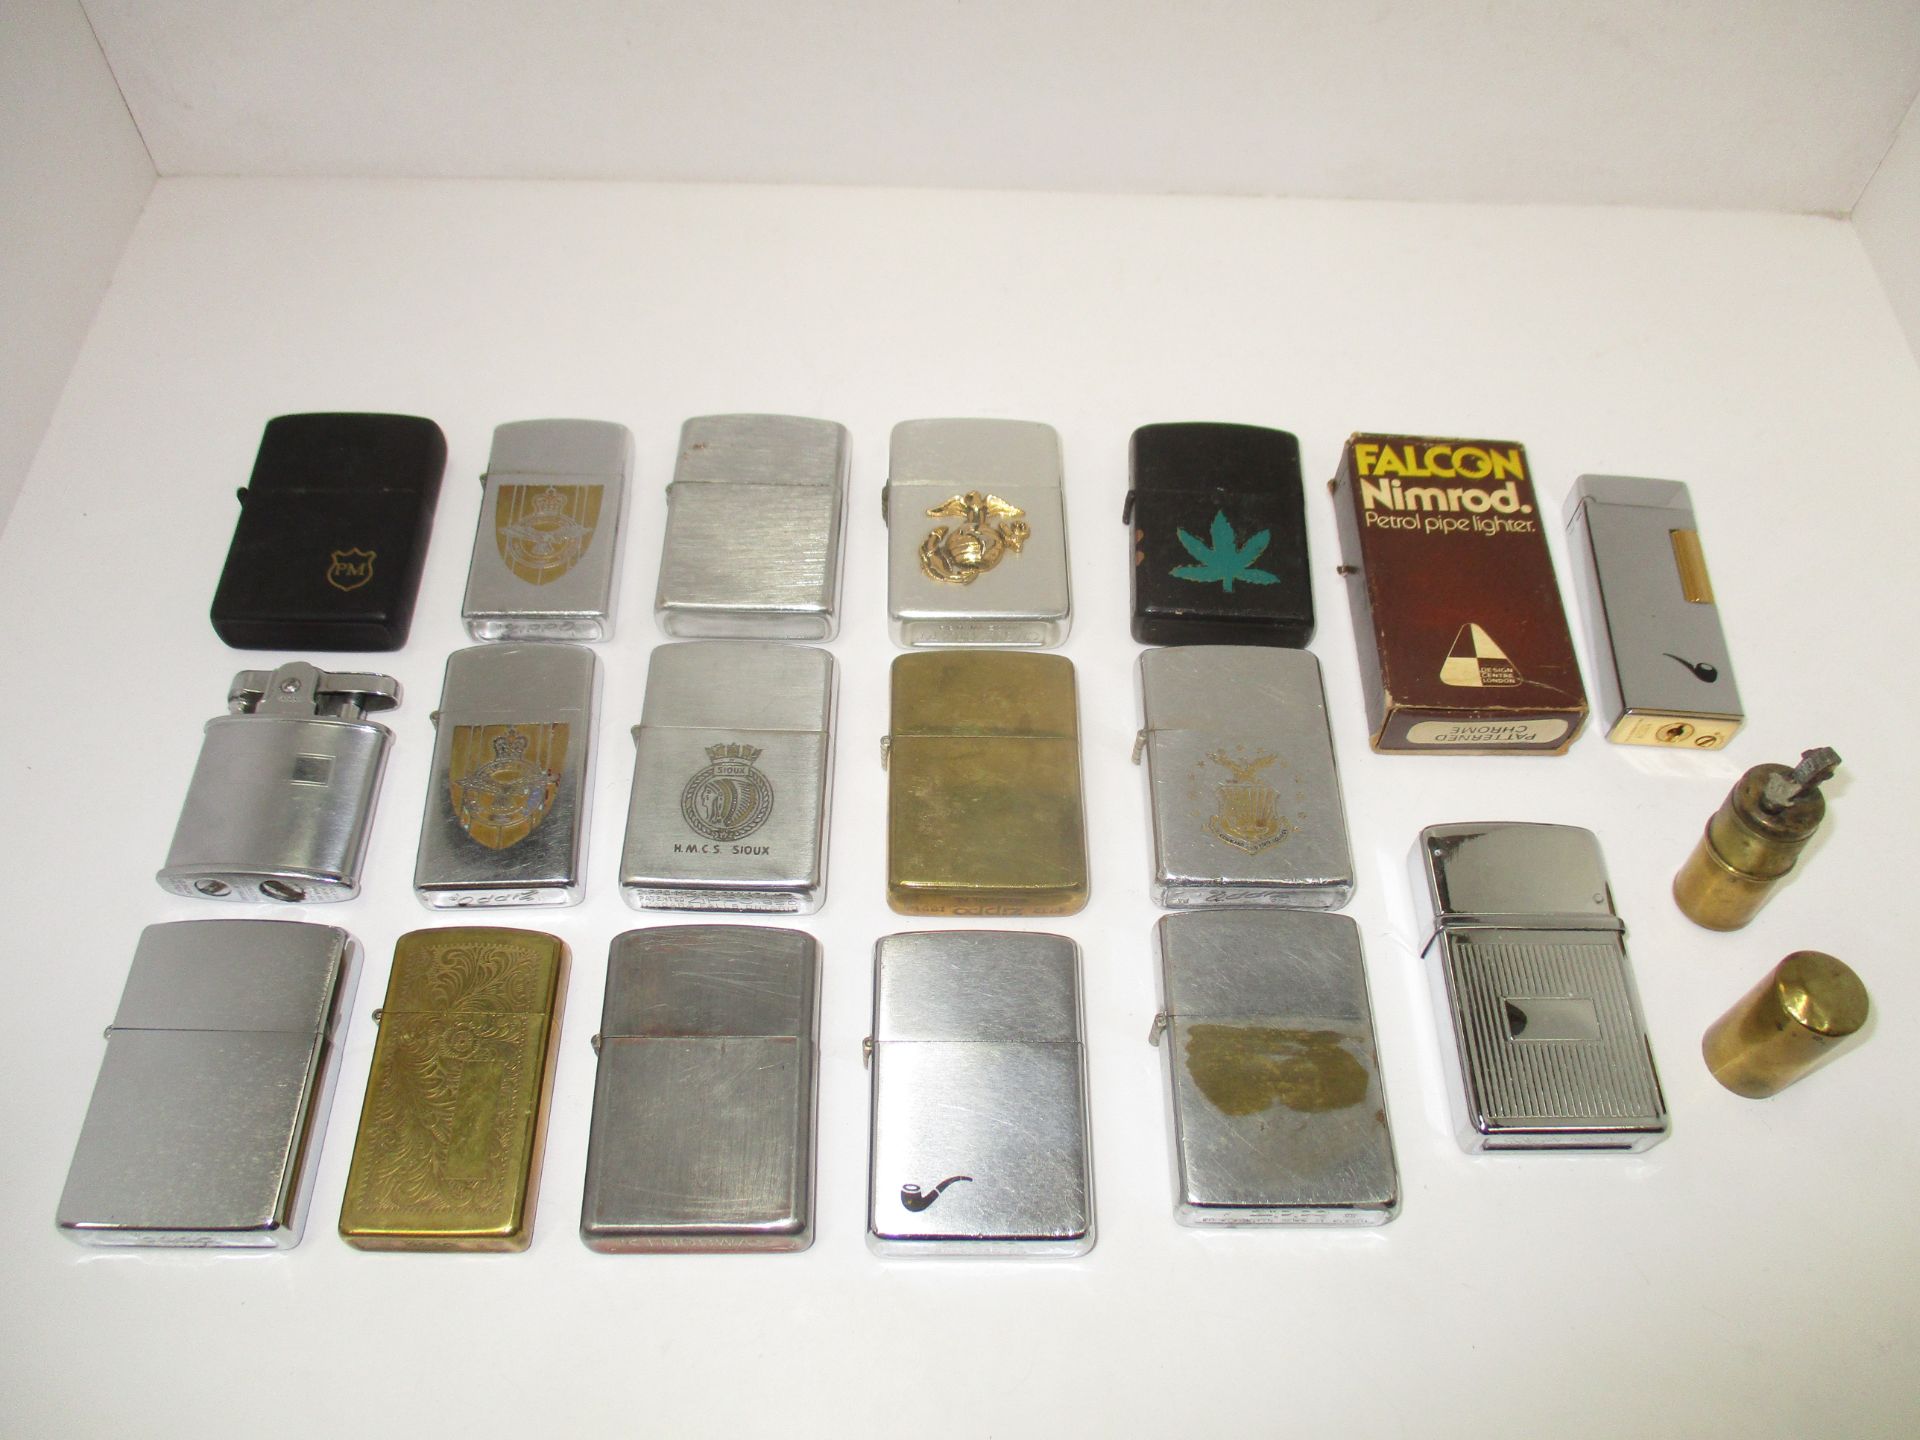 Contents to box - 18 x assorted cigarette lighters by Zippo, Falcon Nimrod, Crest Craft,